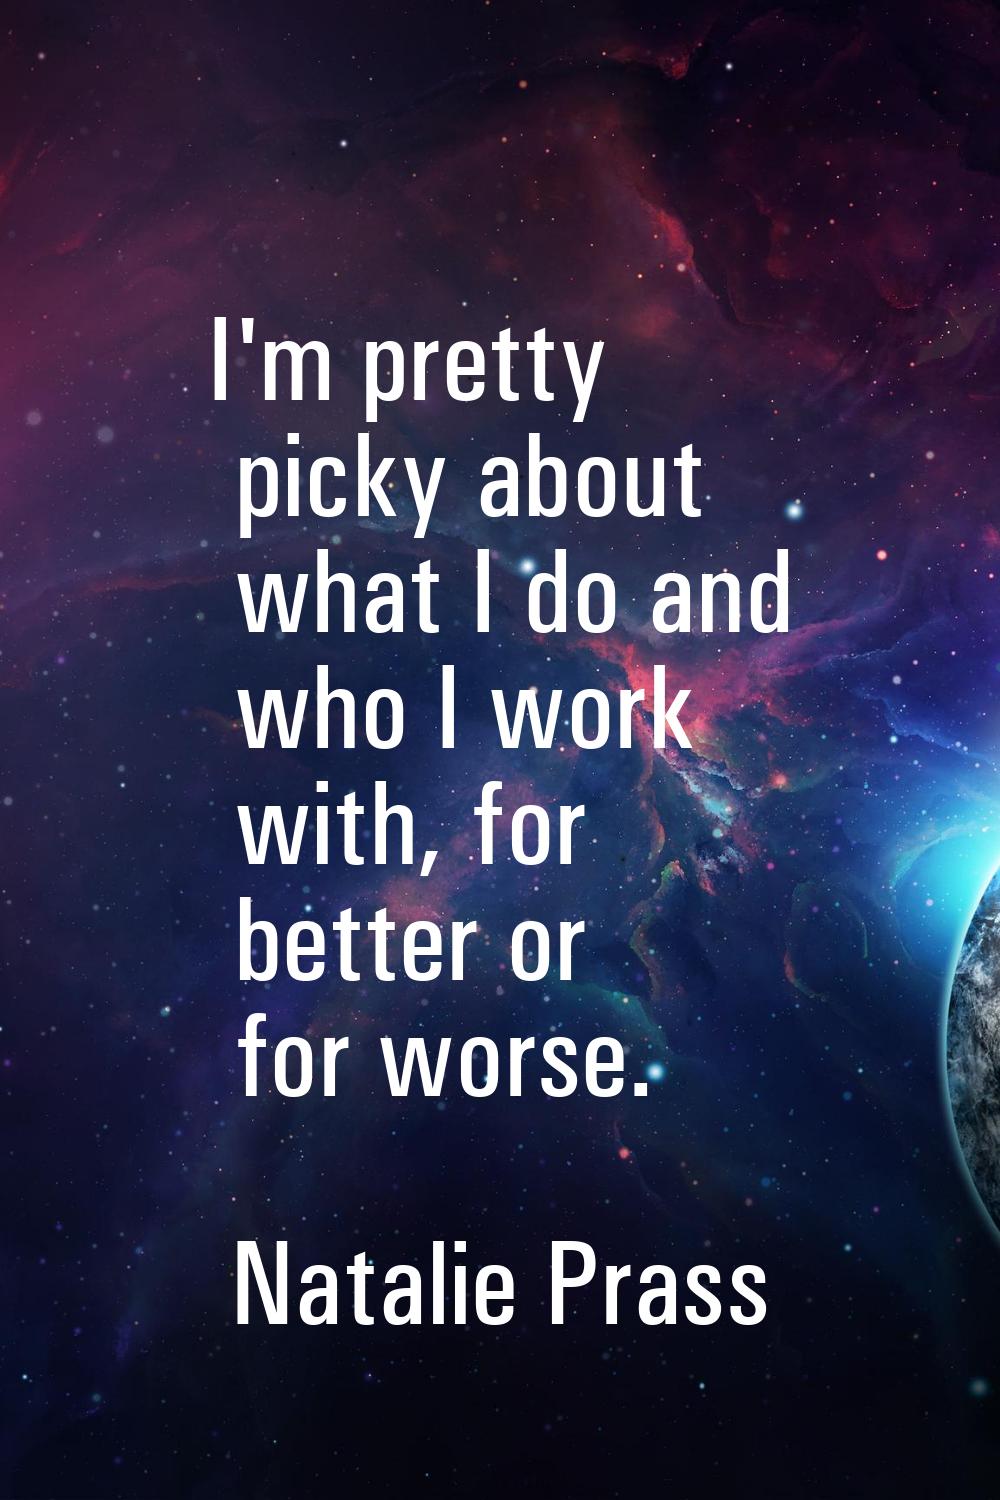 I'm pretty picky about what I do and who I work with, for better or for worse.